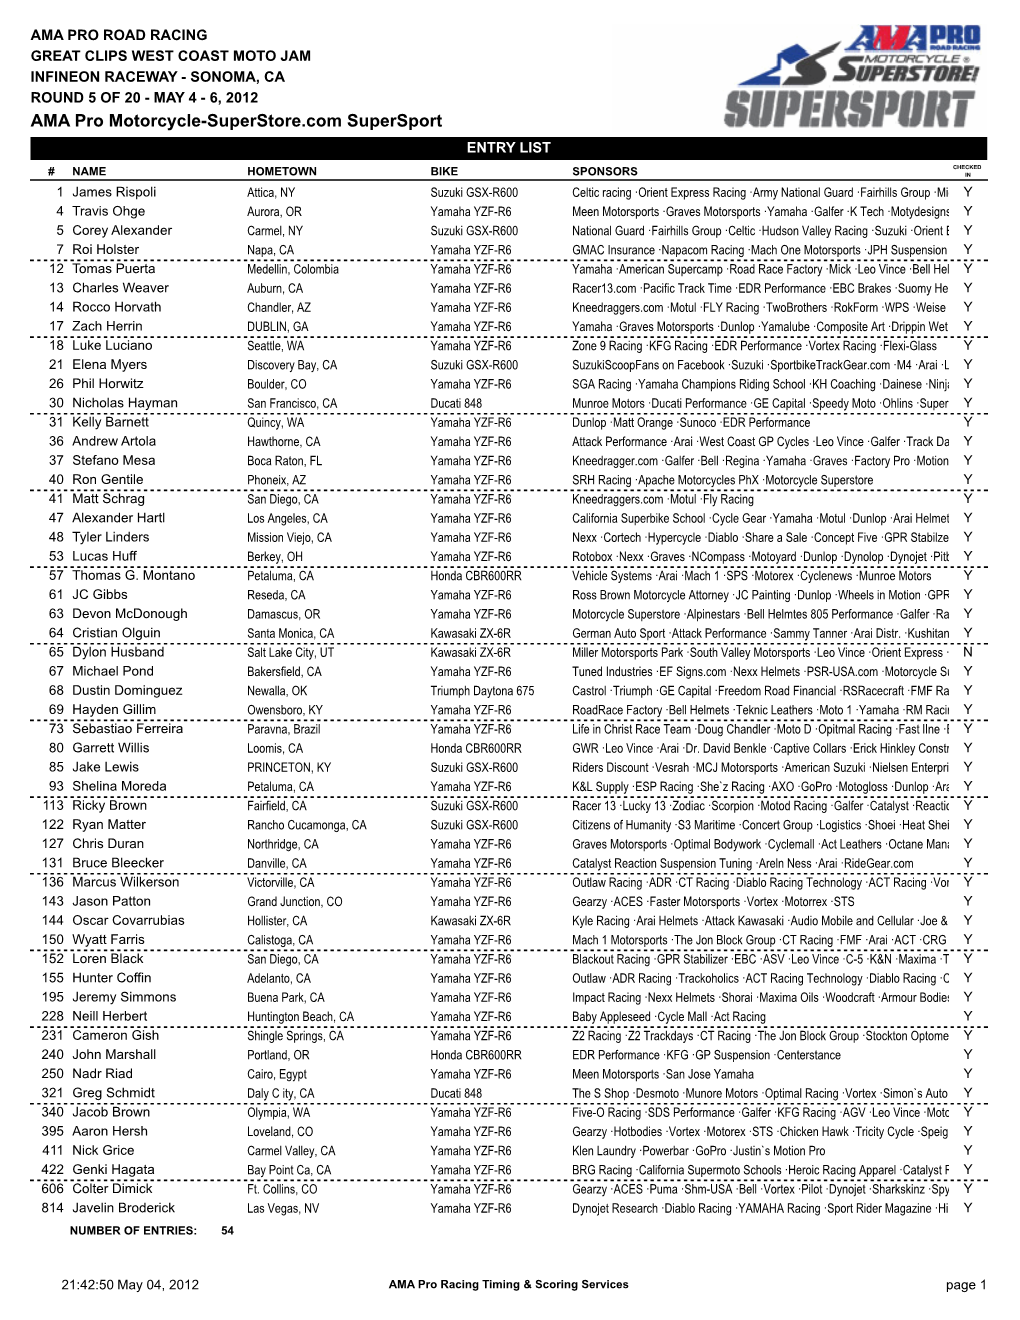 AMA Pro Motorcycle-Superstore.Com Supersport ENTRY LIST